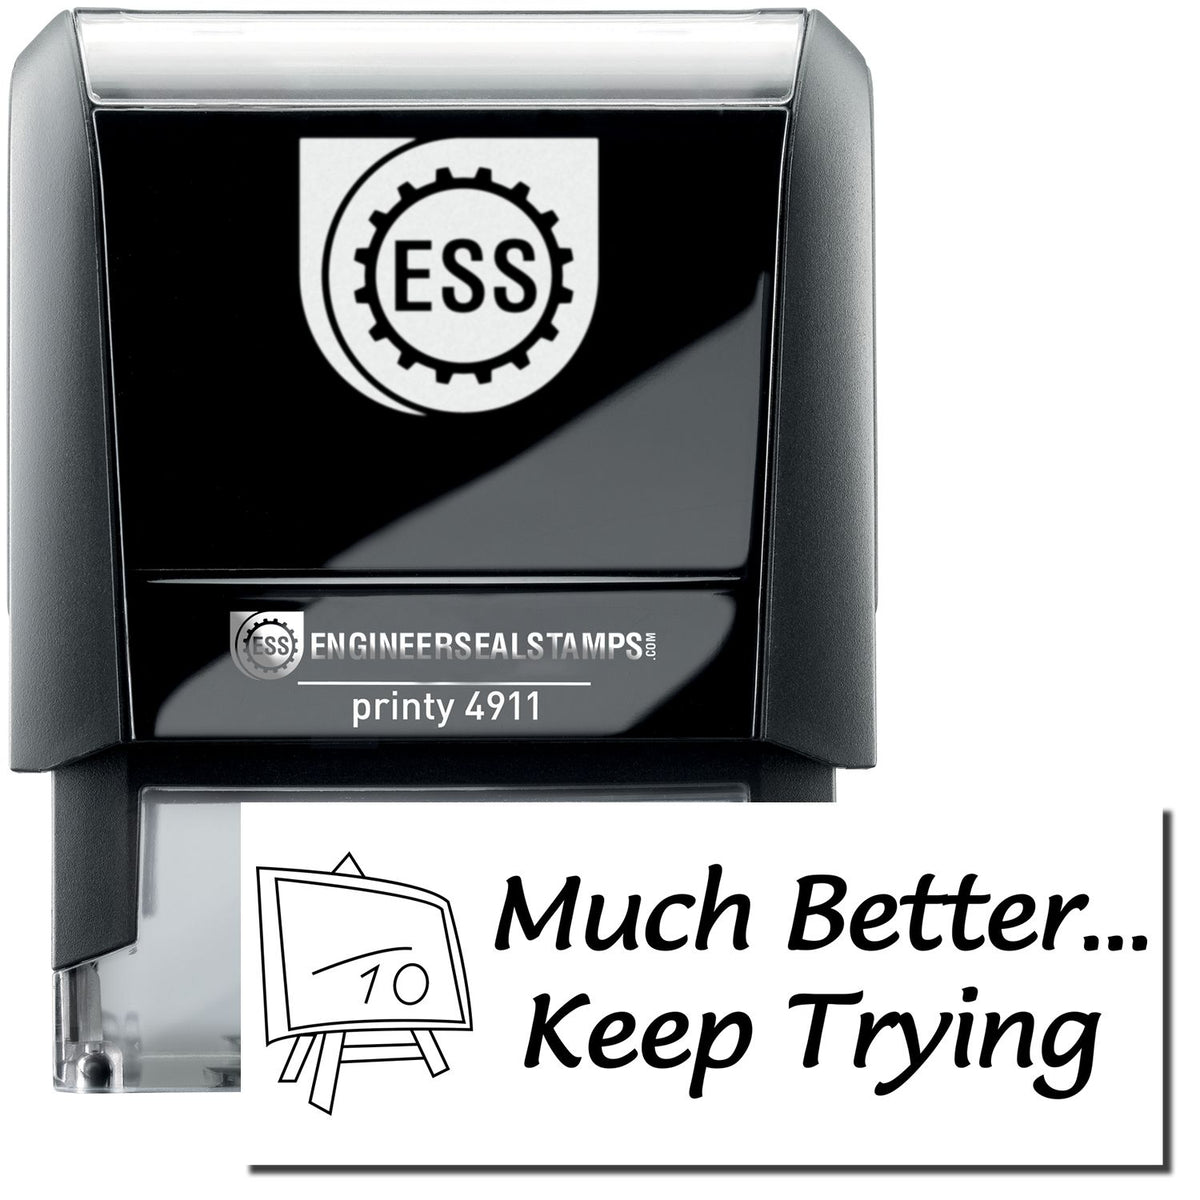 A self-inking stamp with a stamped image showing how the text &quot;Much Better... Keep Trying&quot; with an image showing a blackboard with a line over the number 10 is displayed after stamping.